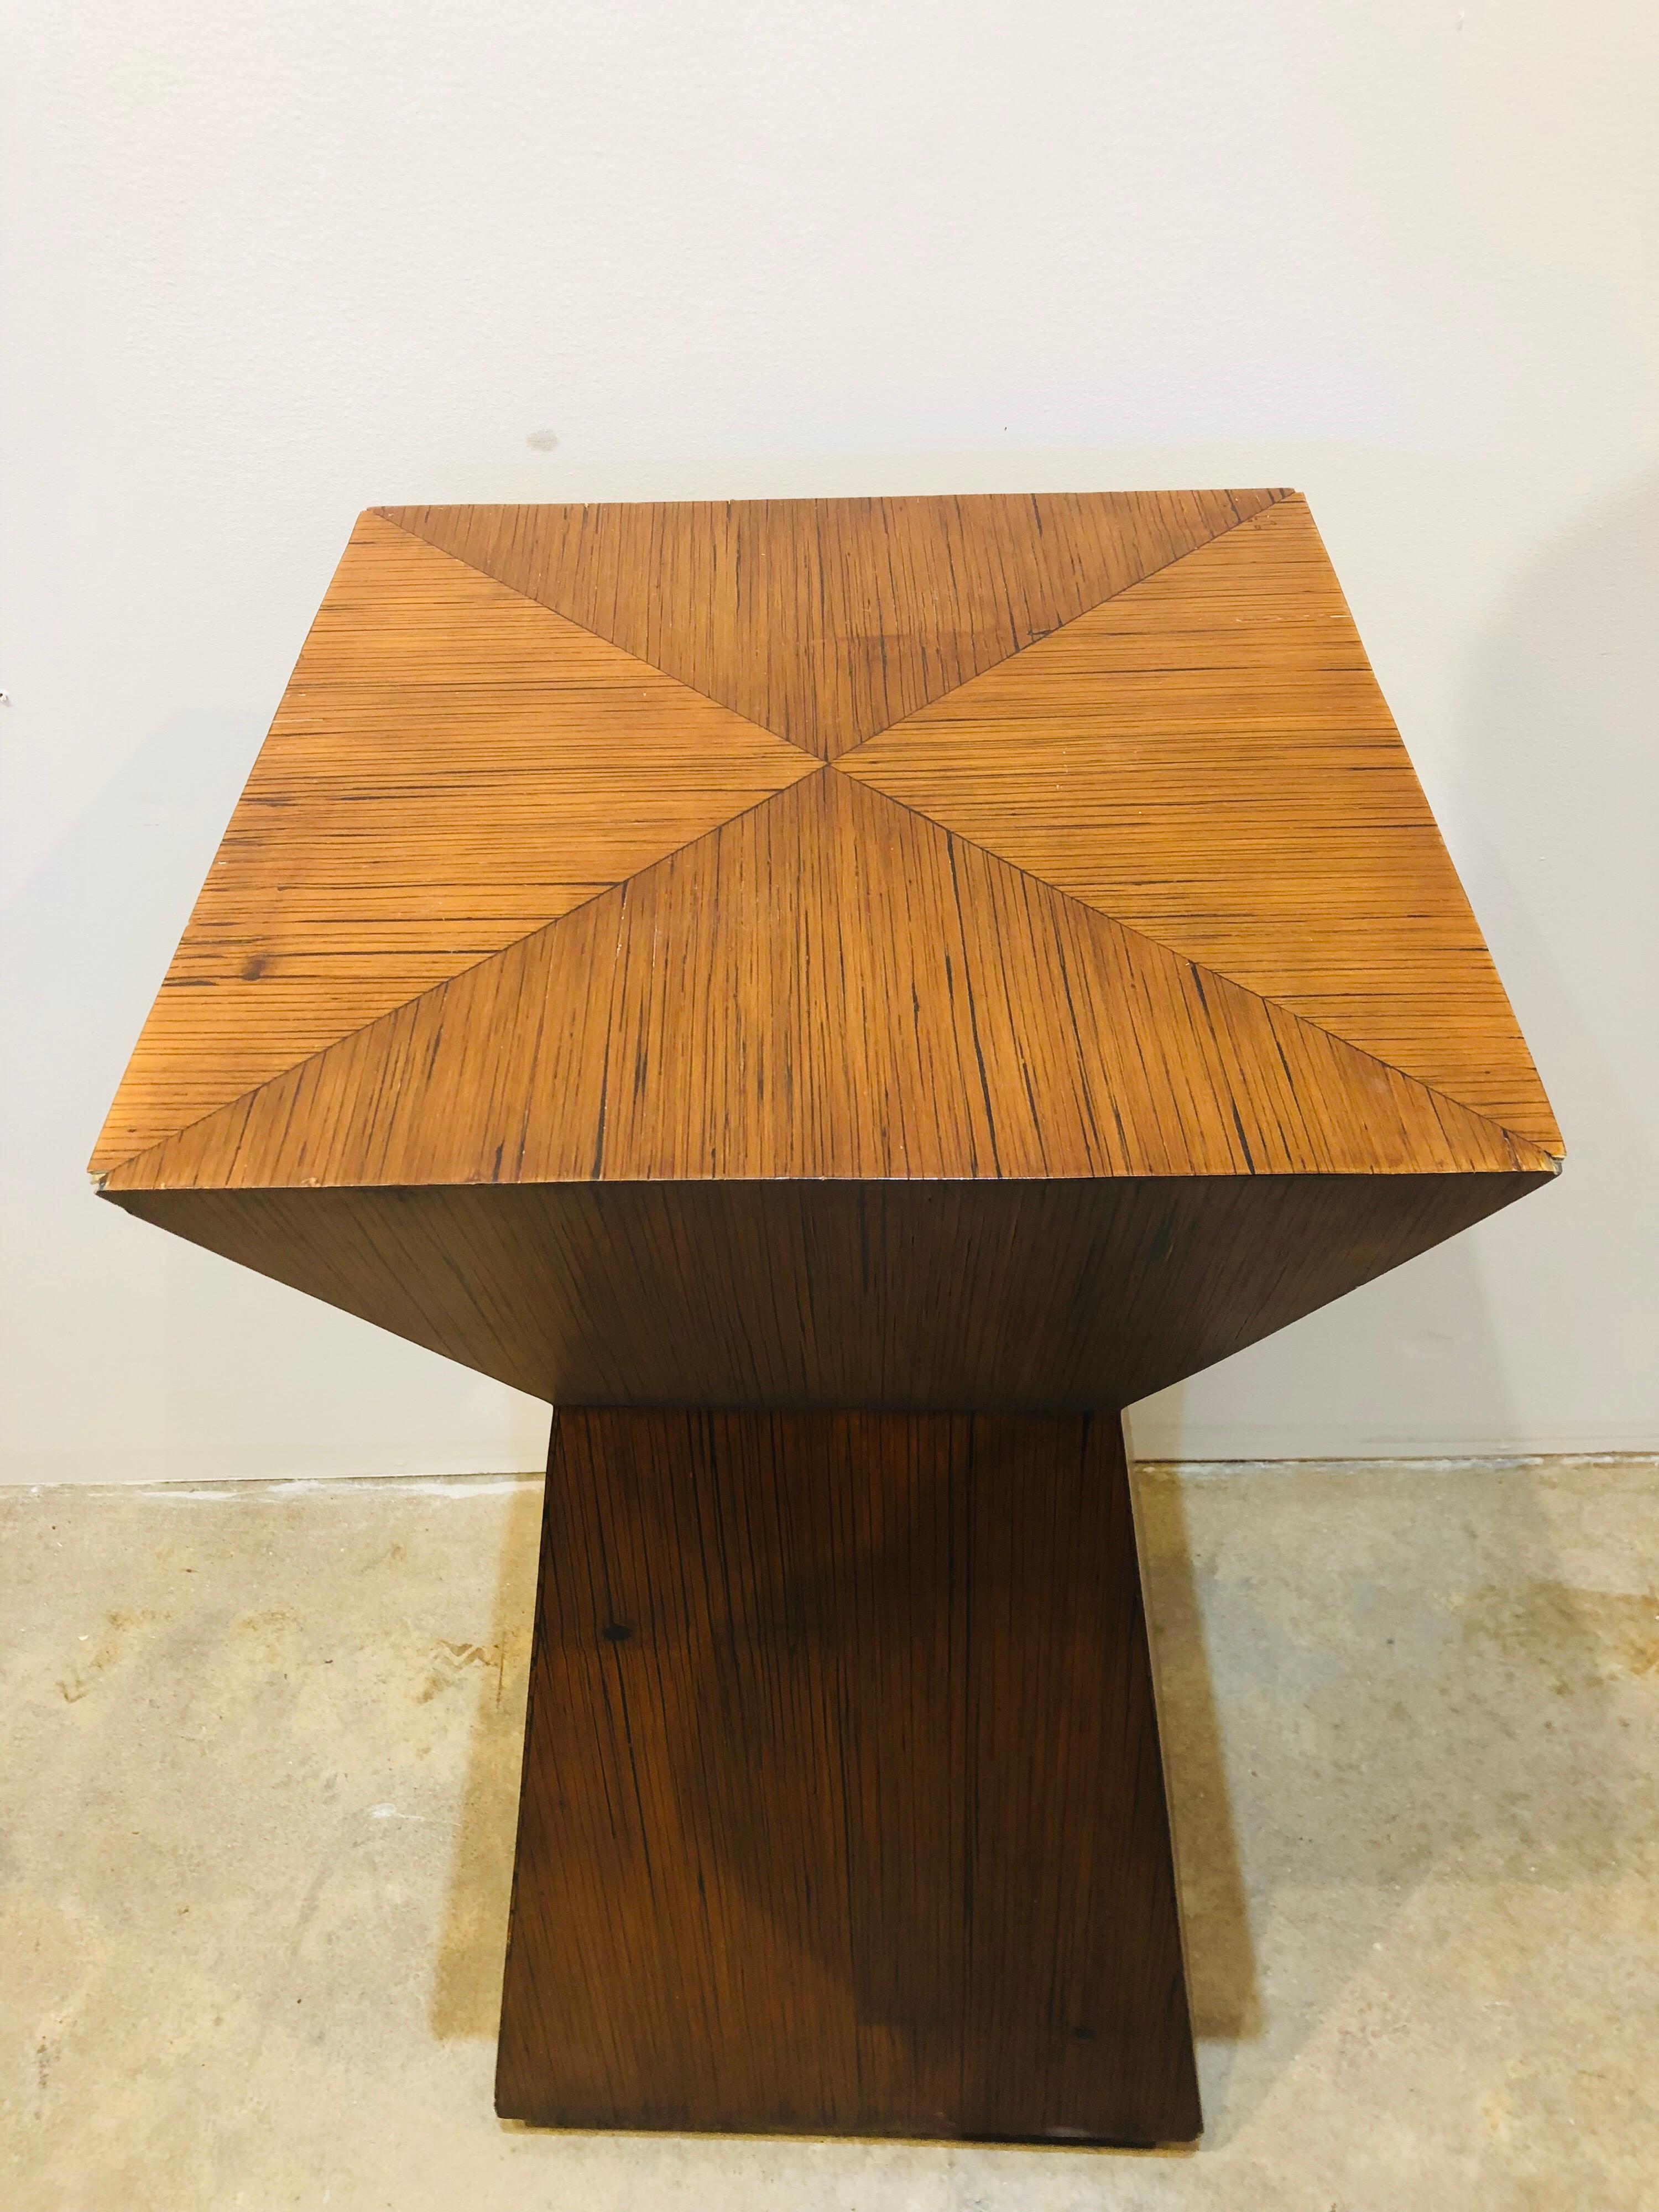 Midcentury Wood Accent Table/ Pedestal In Good Condition For Sale In Chicago, IL